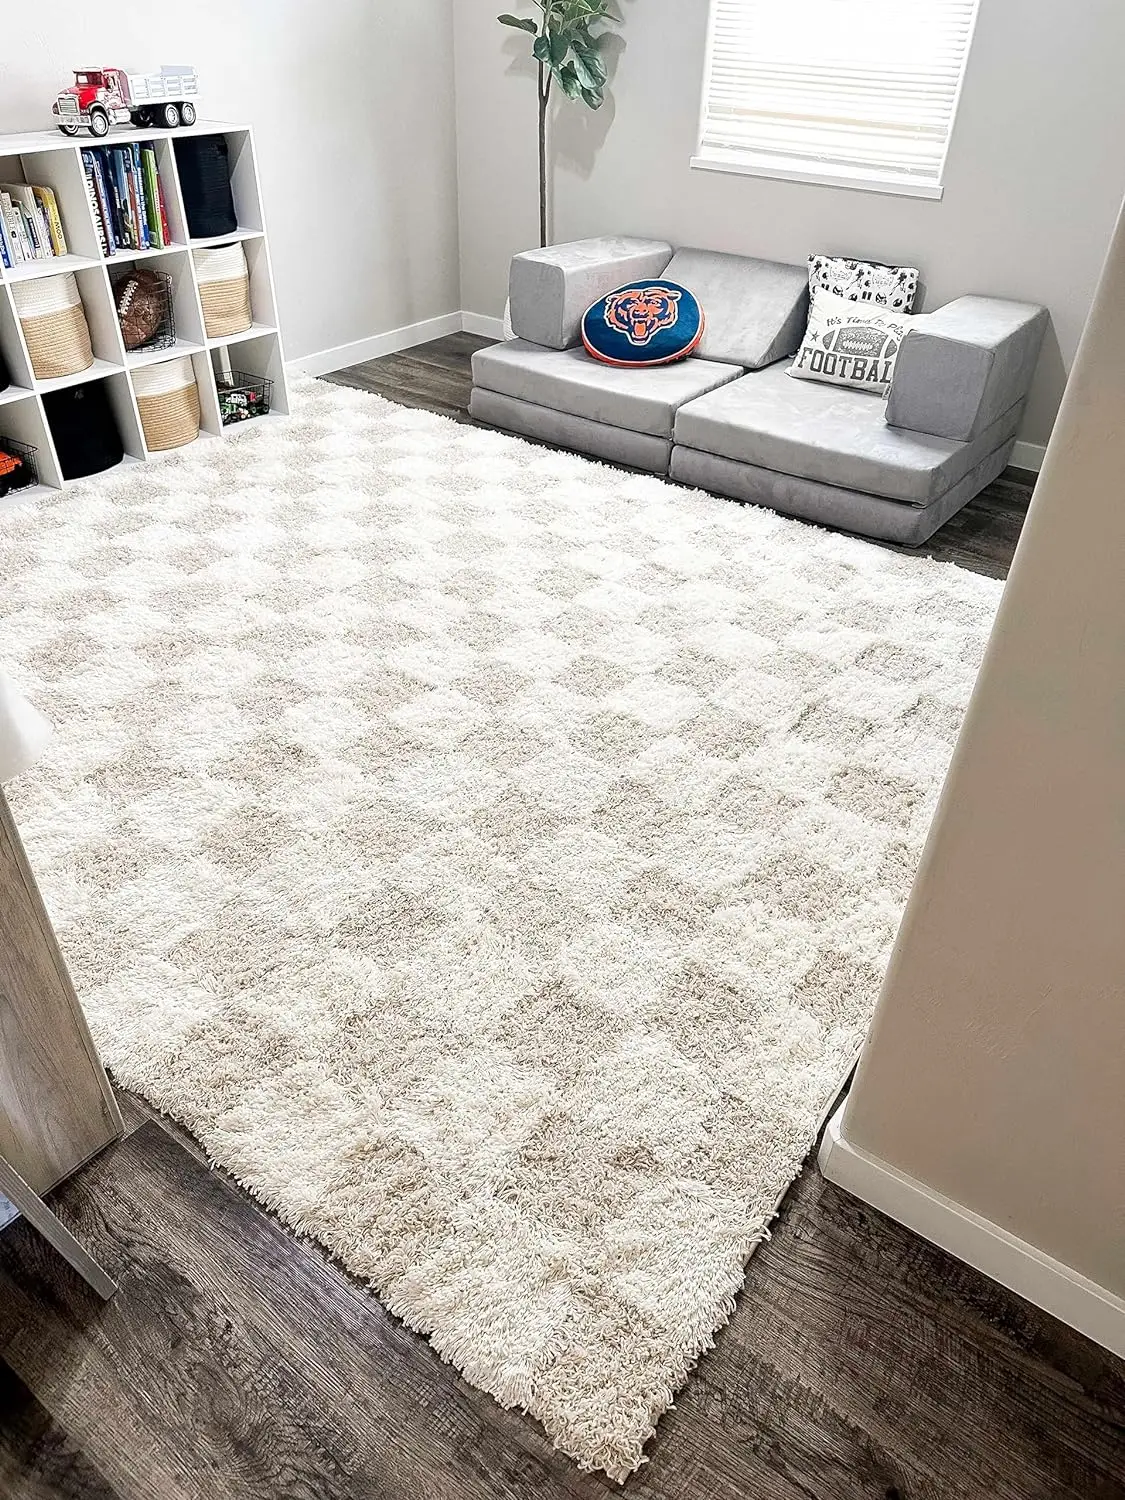 

Checkered Shag Area Rug-High Pile Fluffy Shaggy Touch-Square Tiles-Kids Room,Living Room Shaggy Carpet-7'10" X 10'3"